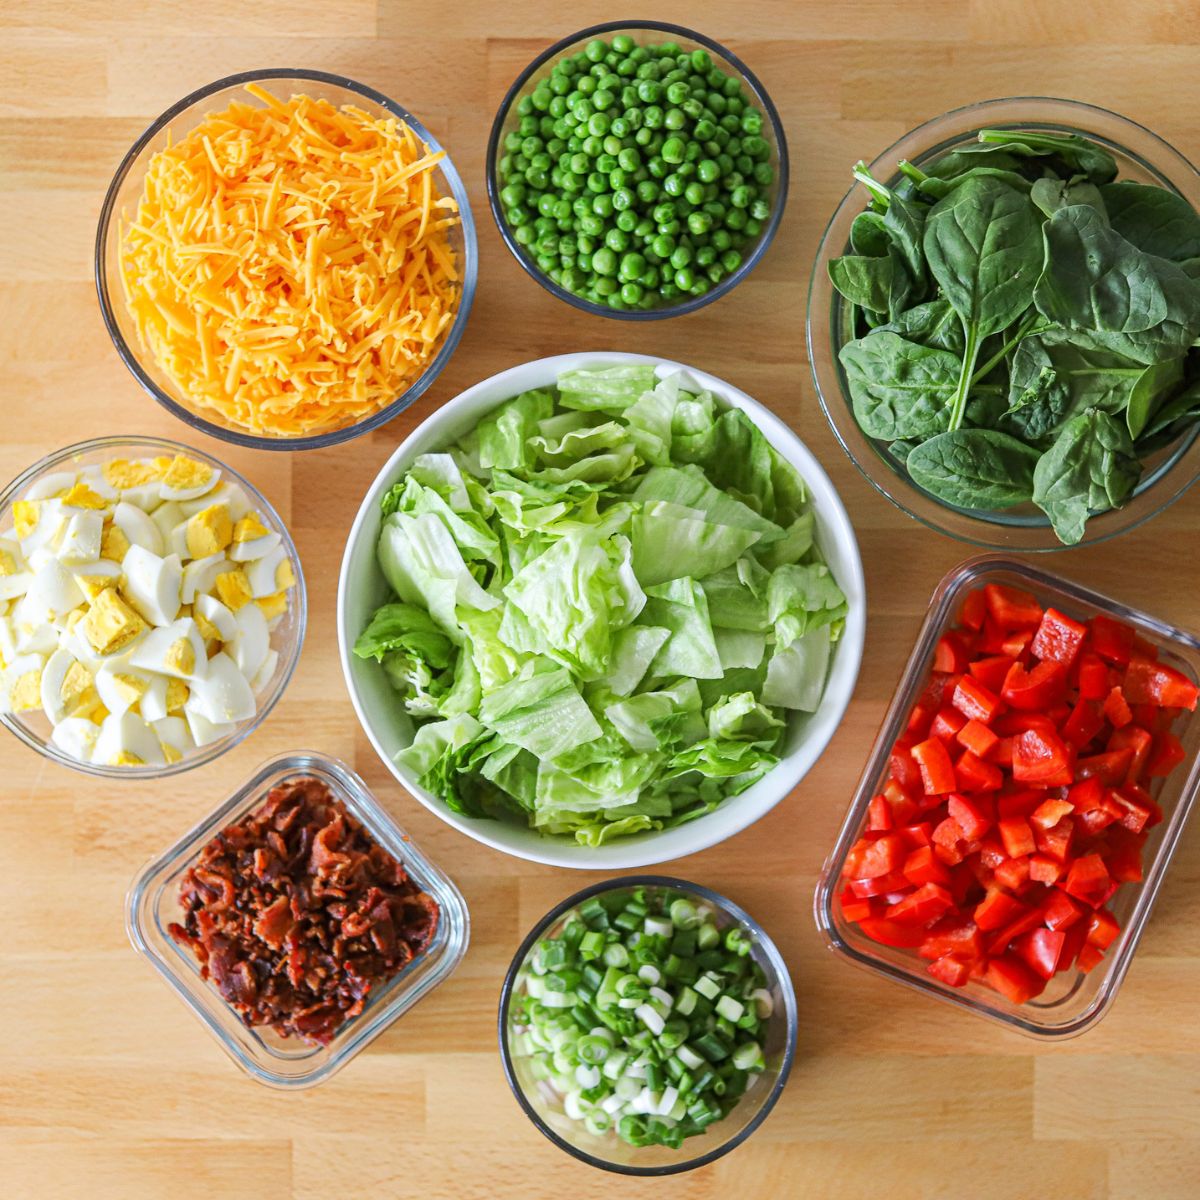 8 bowls of various sizes filled with the ingredients for a layered salad including baby spinach, iceberg lettuce, peas, cheddar cheese, hardboiled eggs, bacon, red bell pepper, and green onion.